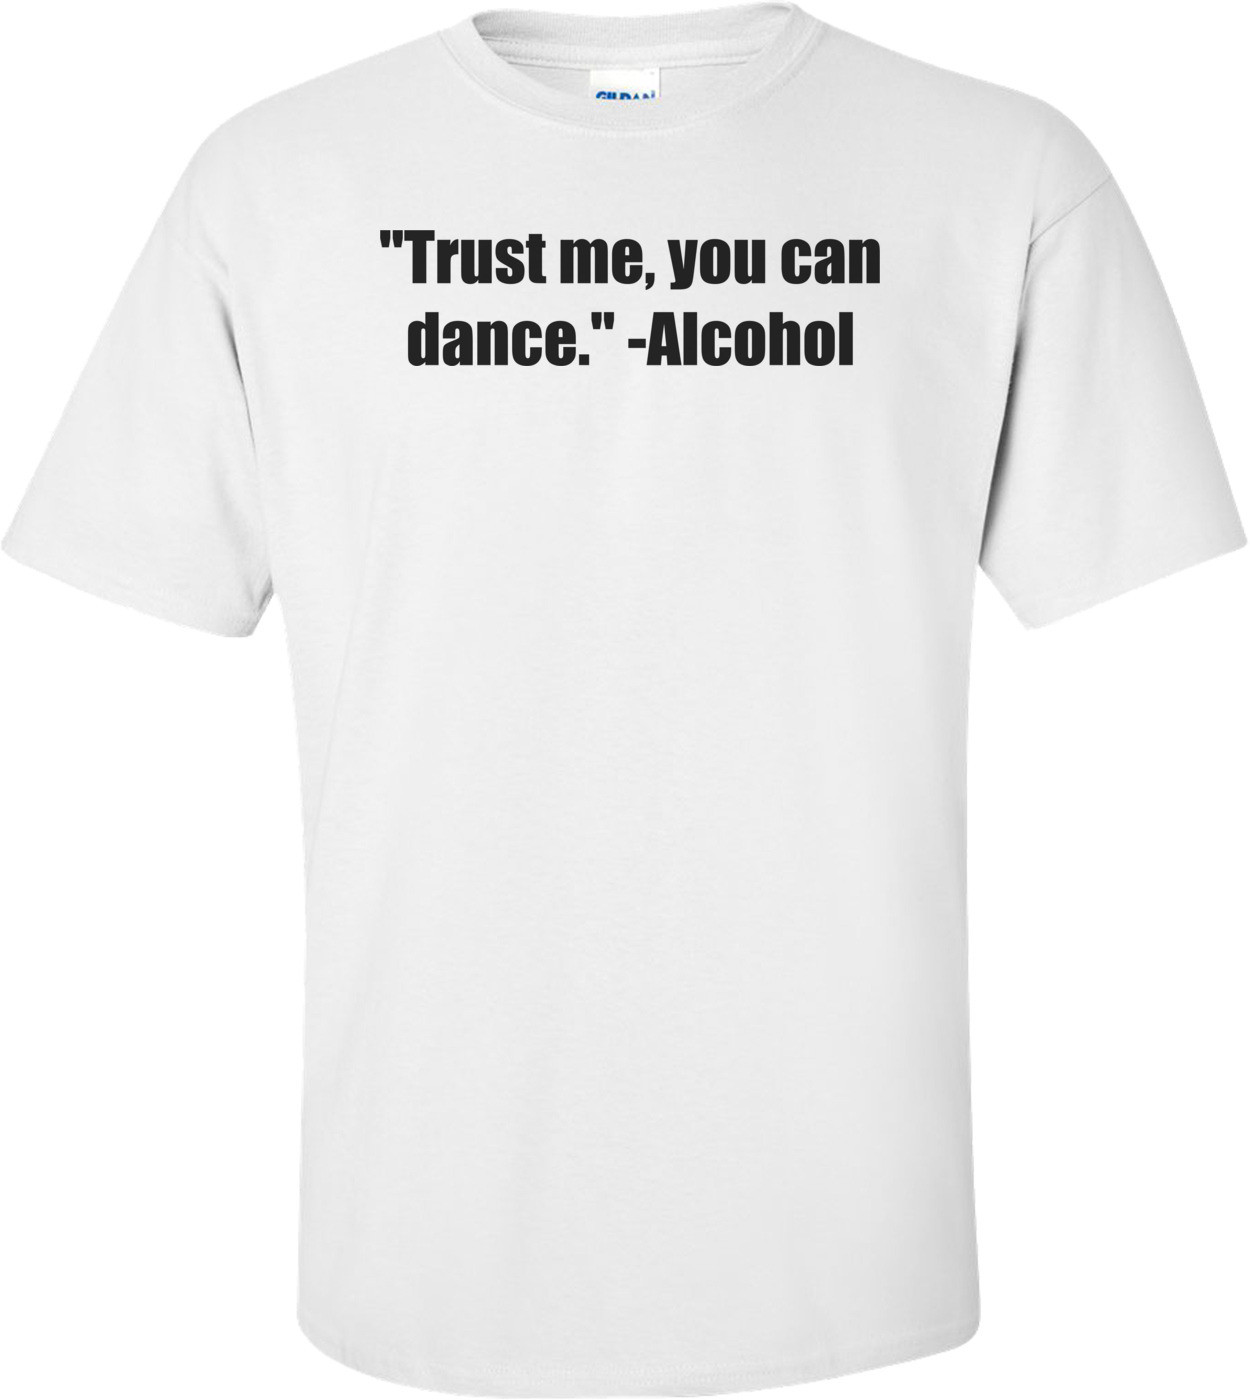 "Trust me, you can dance." -Alcohol